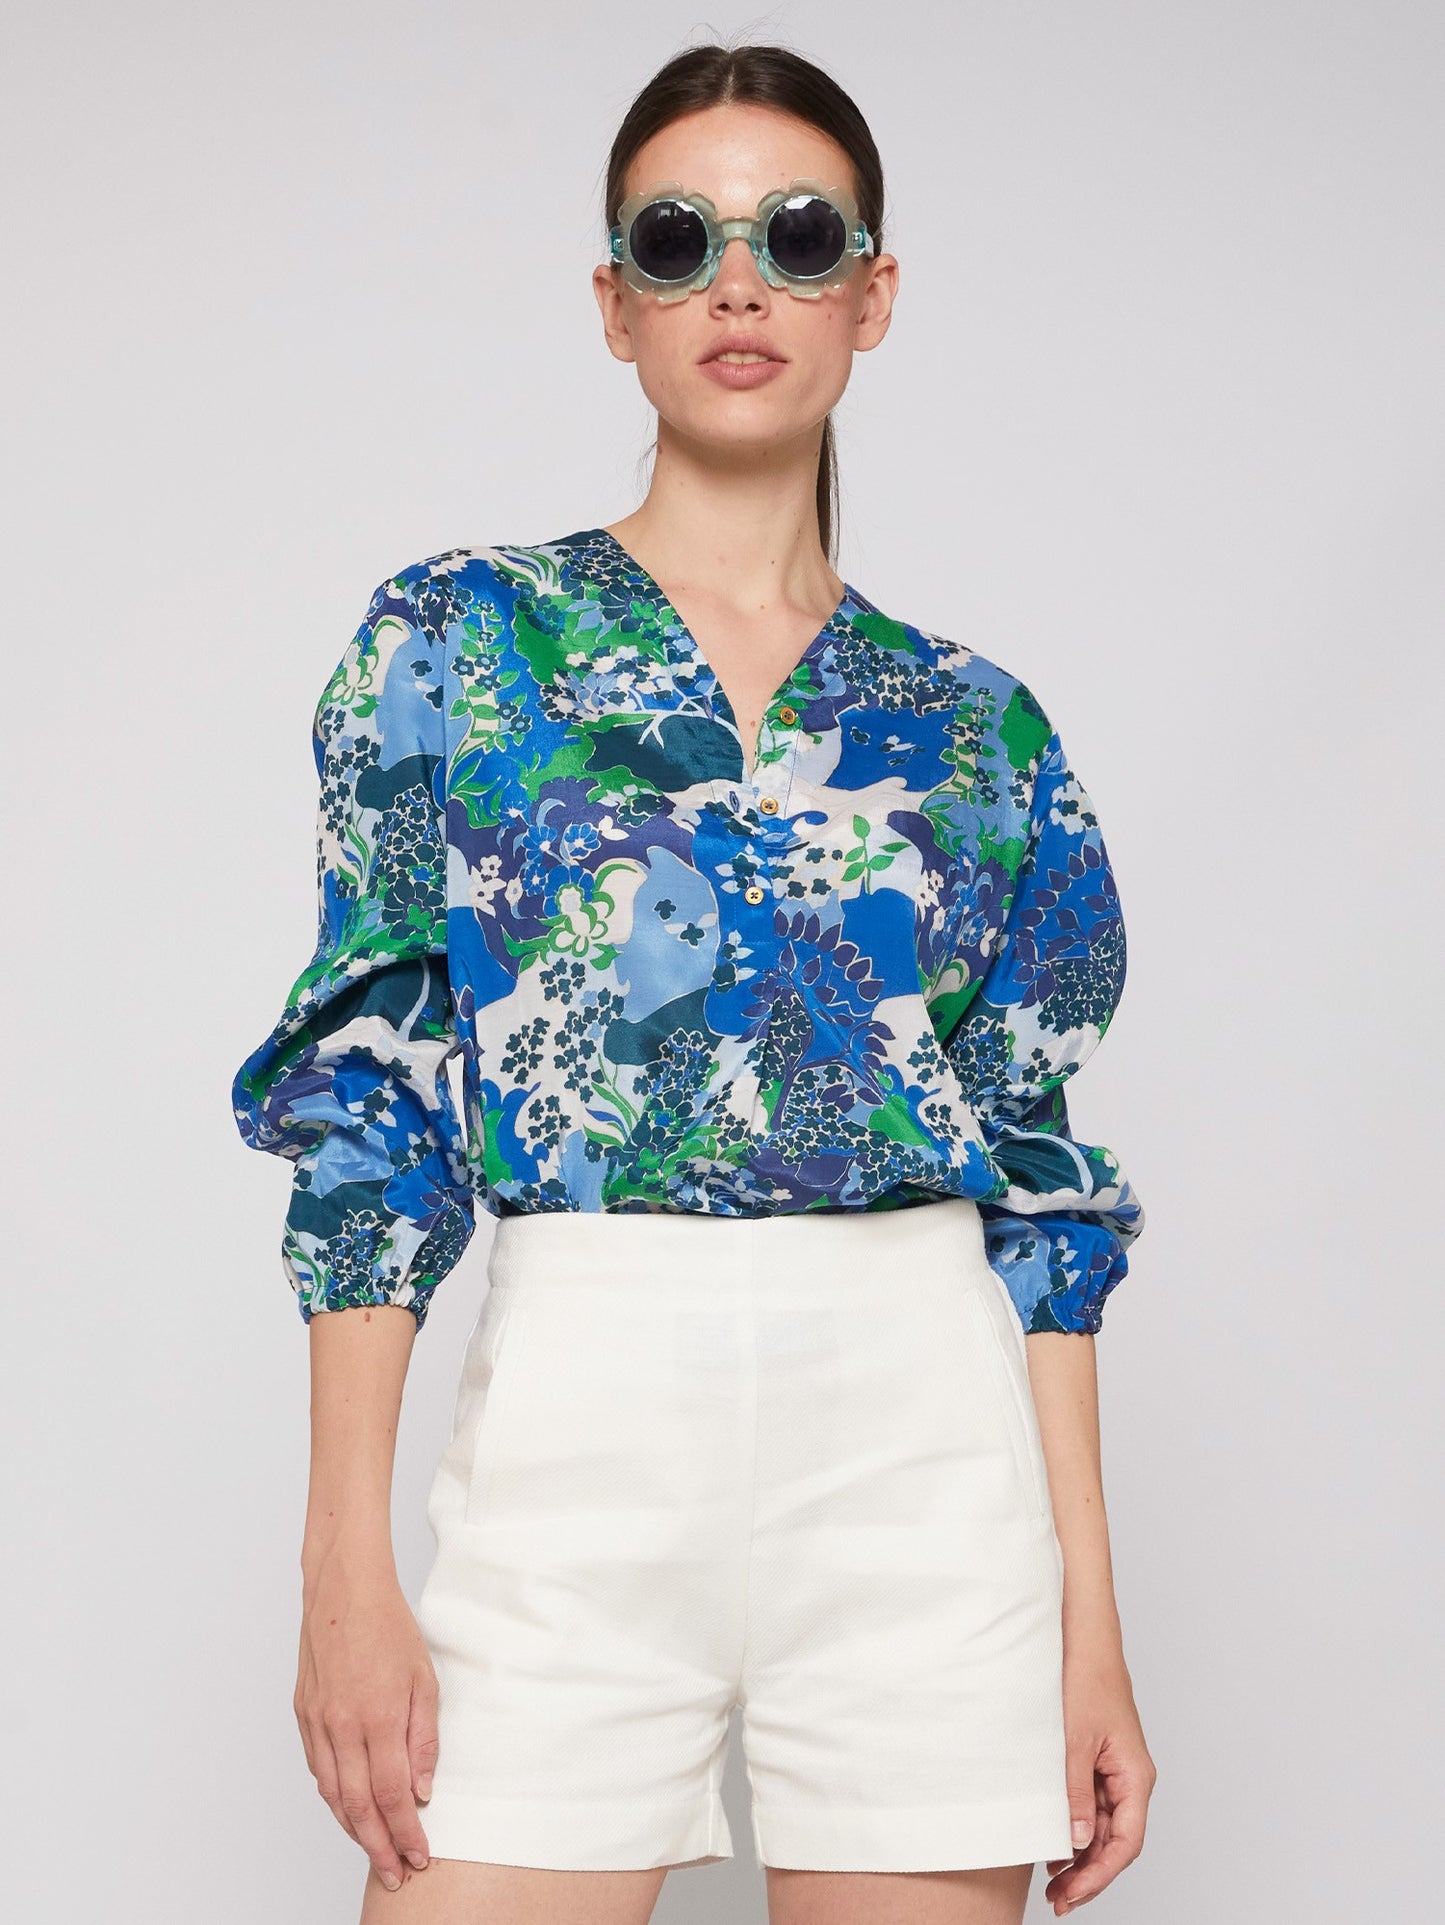 Ebba Shirt in Blue Blossom